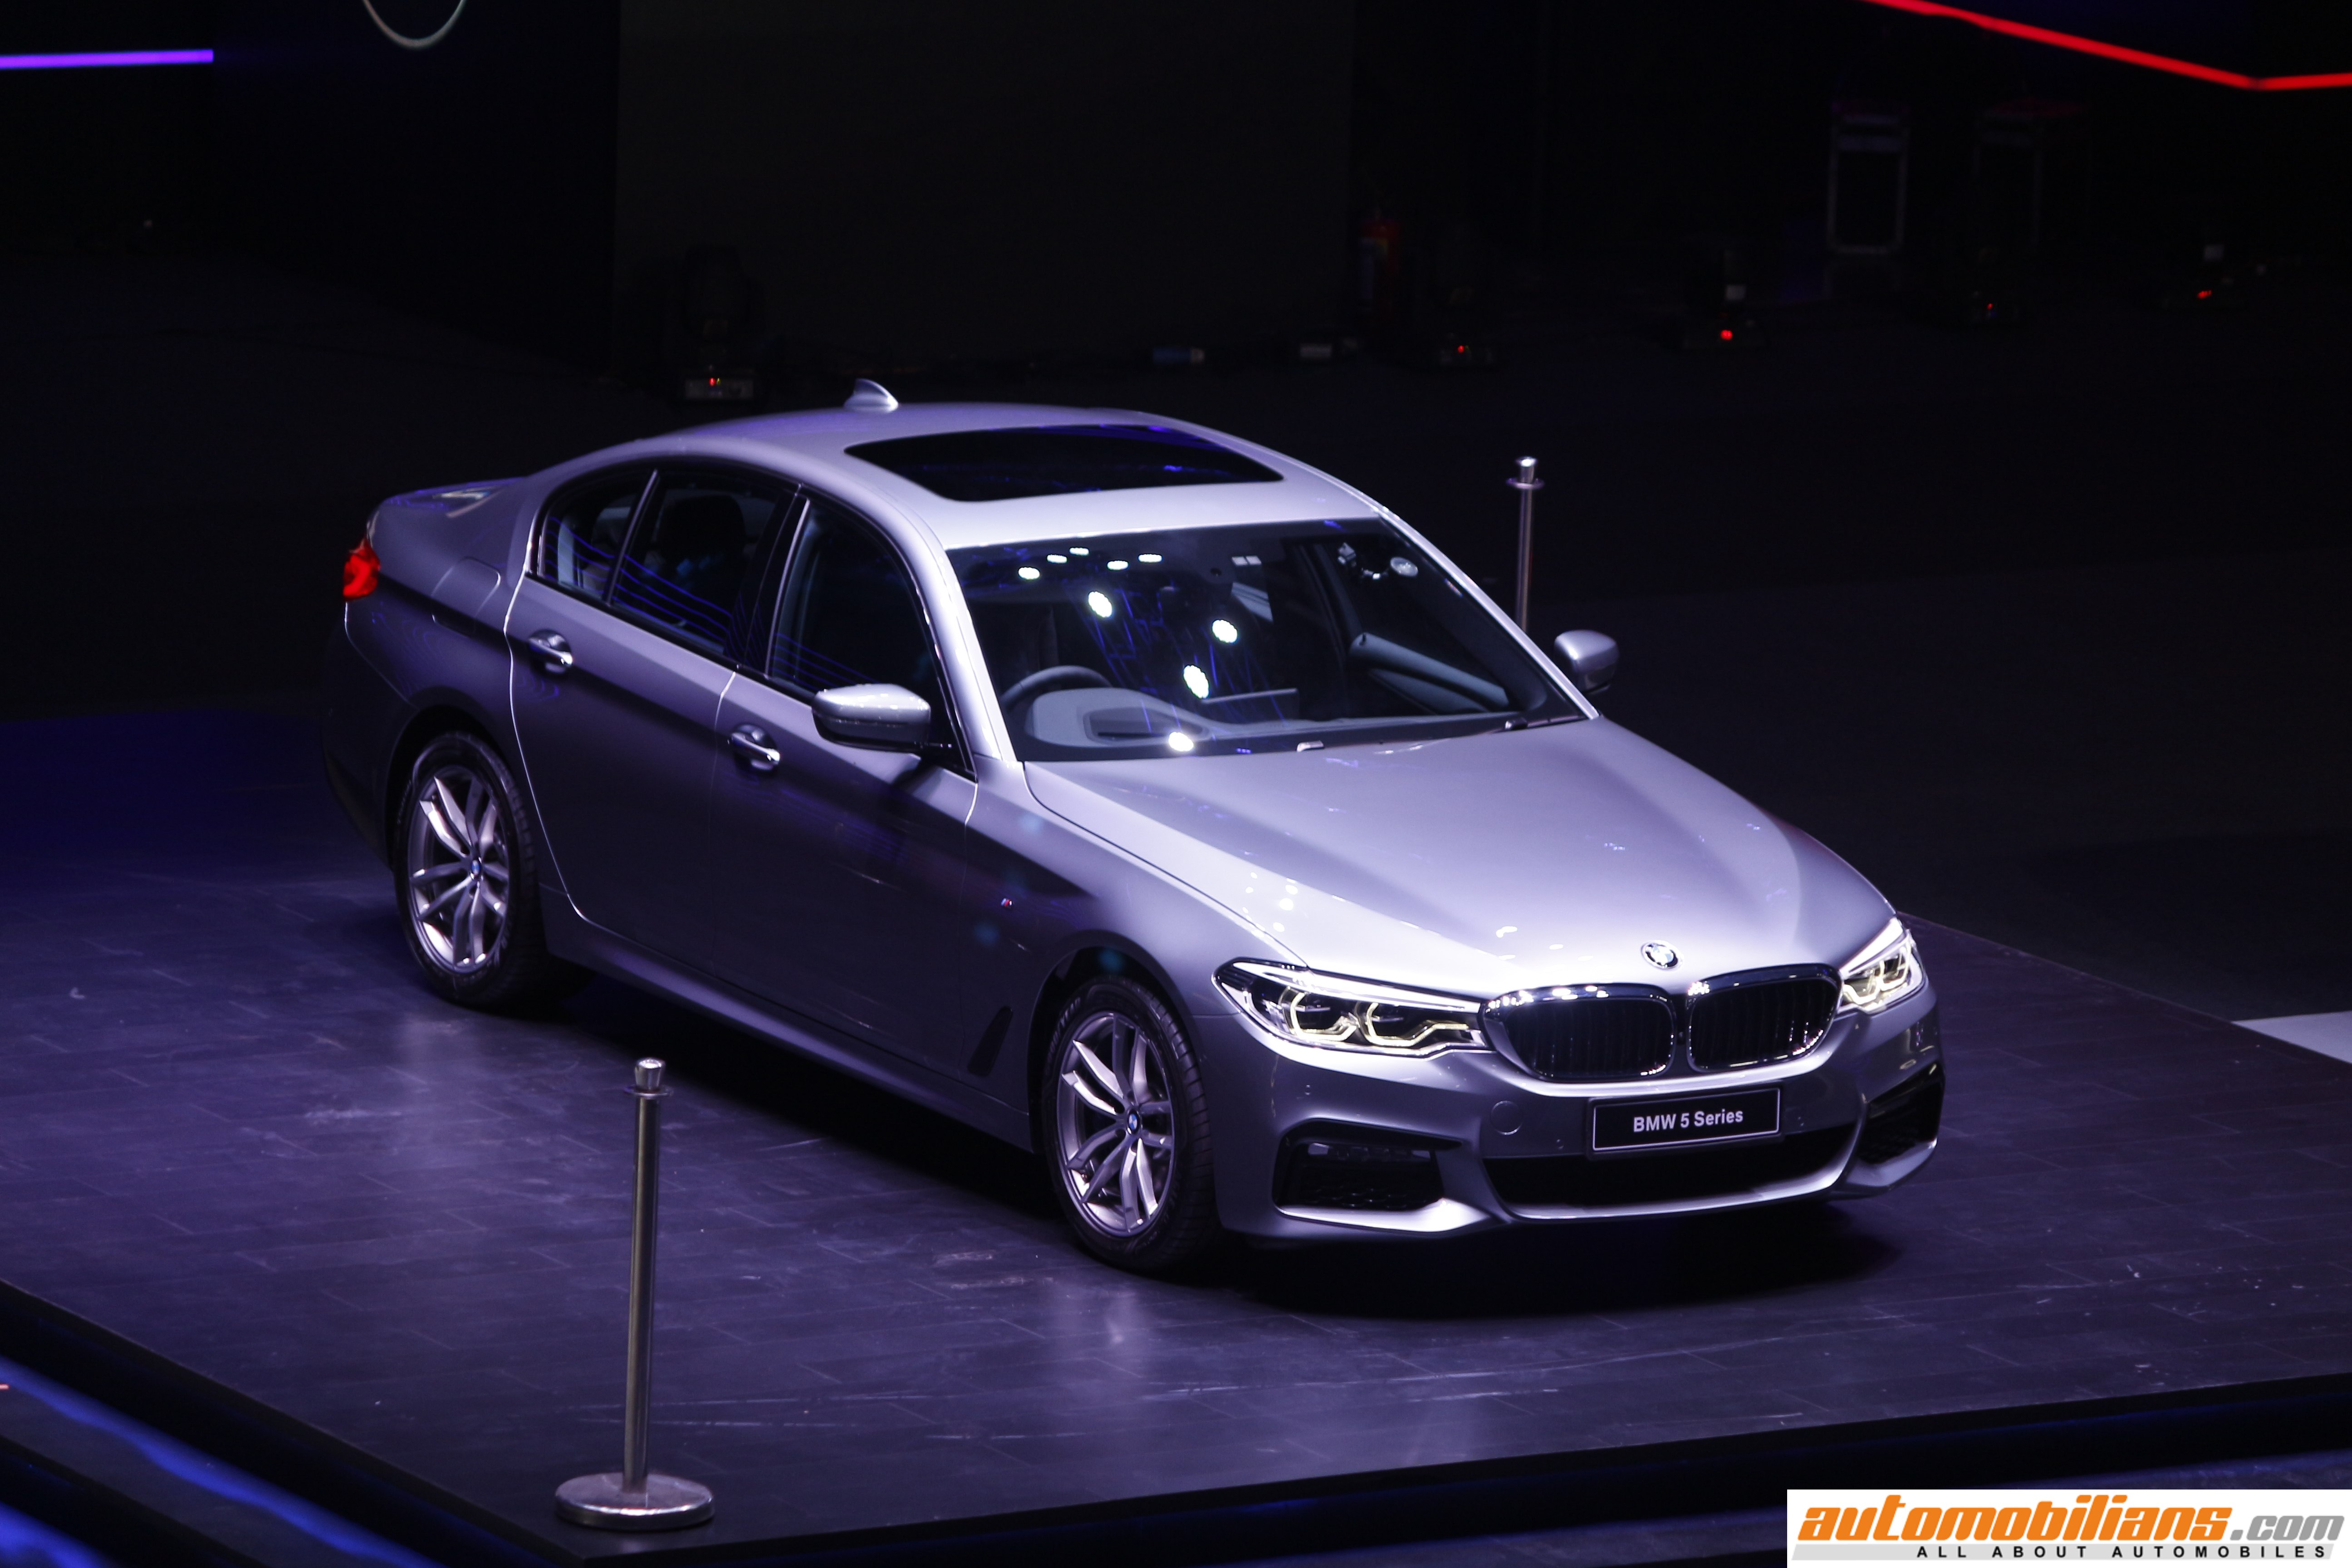 2017 BMW 5-Series Launched In India At Rs. 49.90 Lakhs (Ex-Showroom)